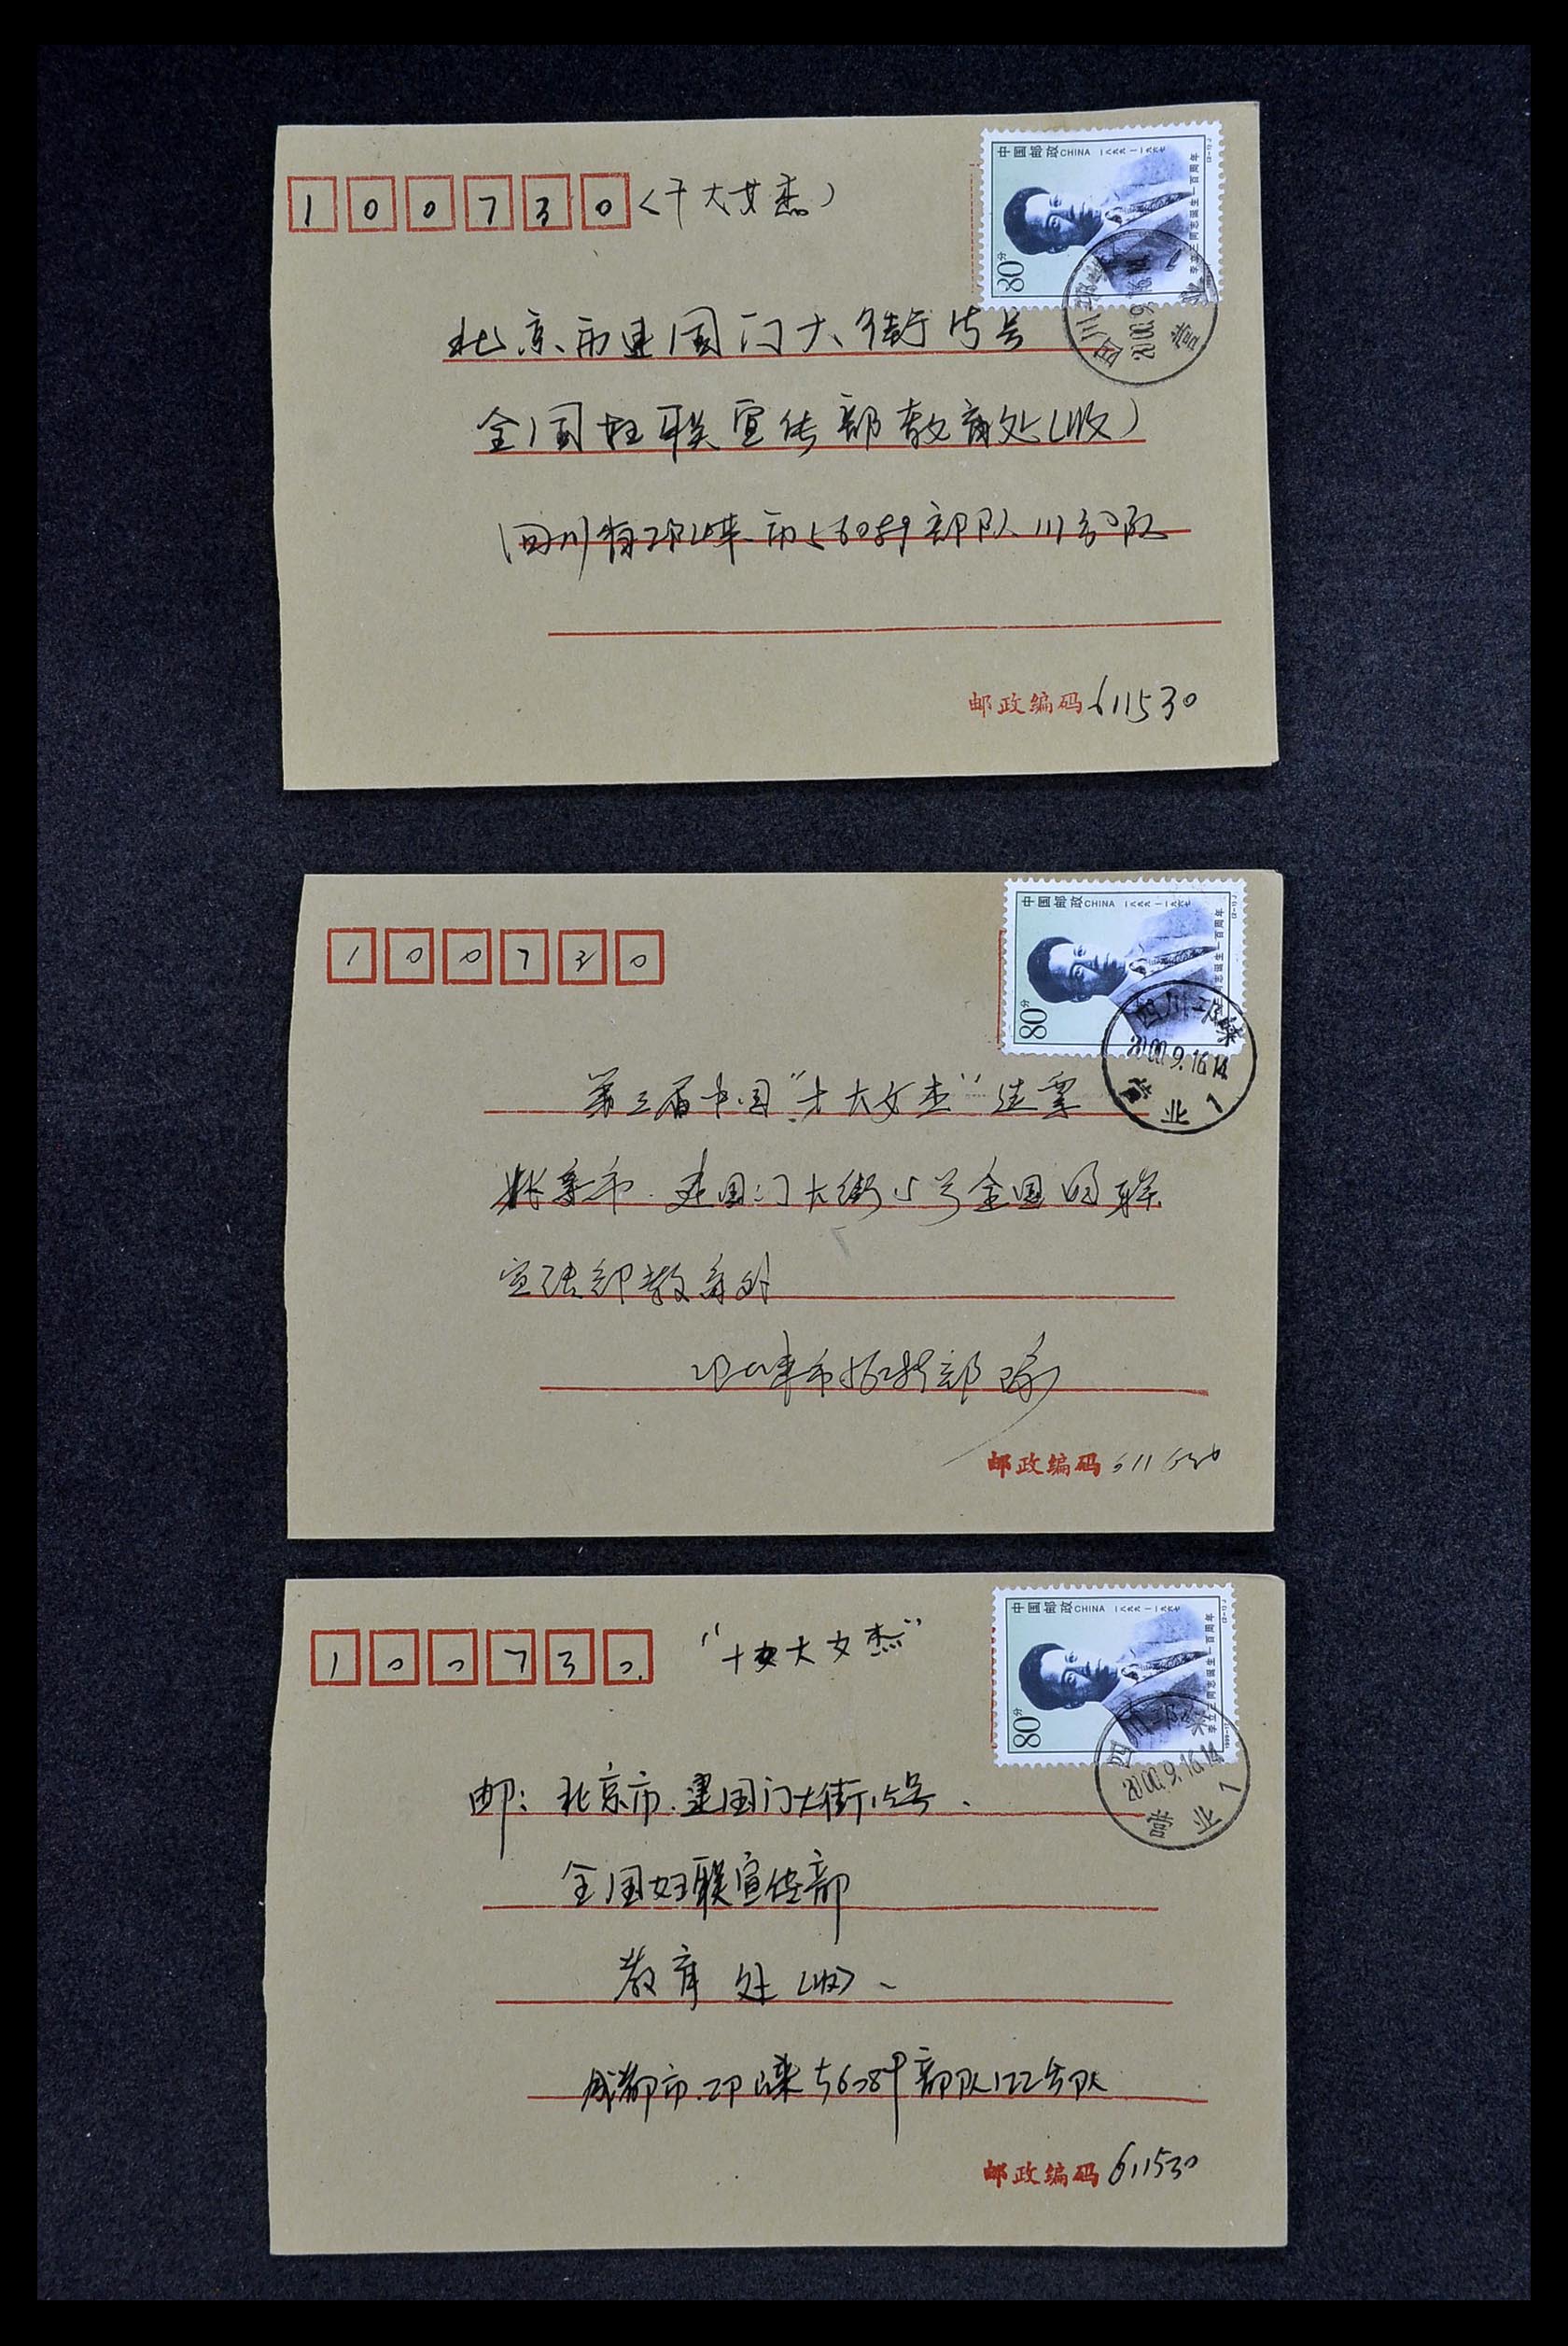 34402 064 - Stamp collection 34402 Taiwan covers 1960-2000.